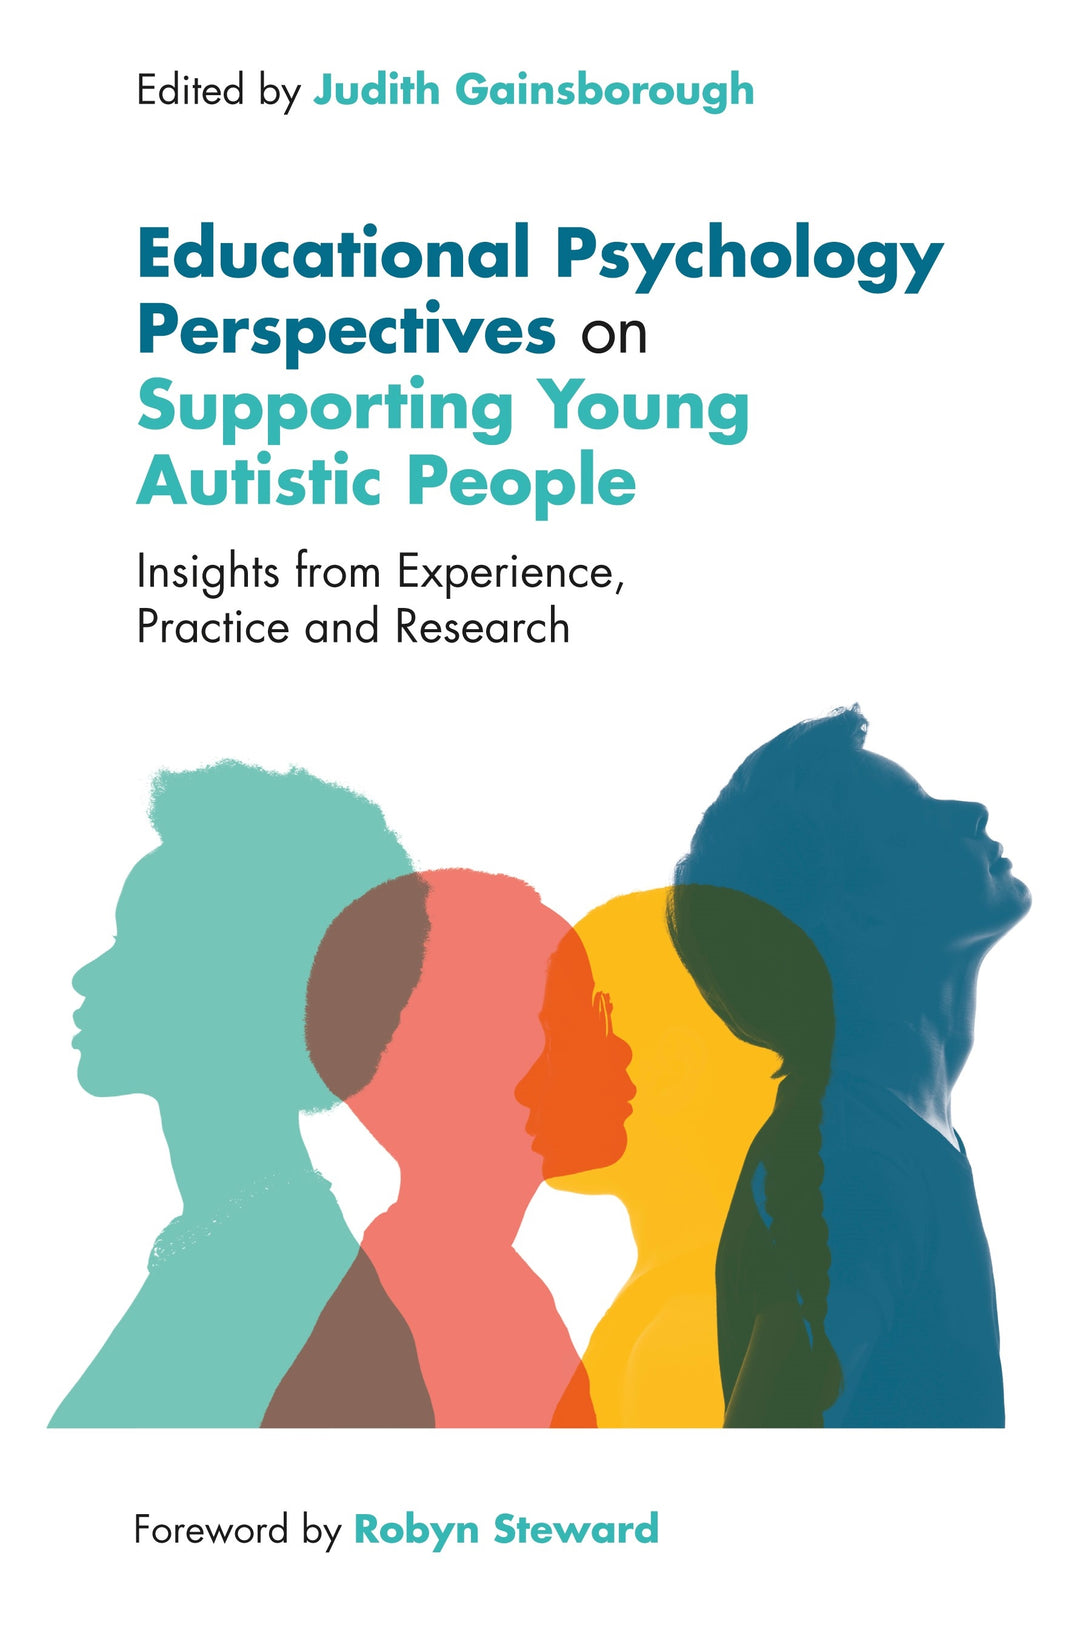 Educational Psychology Perspectives on Supporting Young Autistic People by Robyn Steward, Judith Gainsborough, No Author Listed